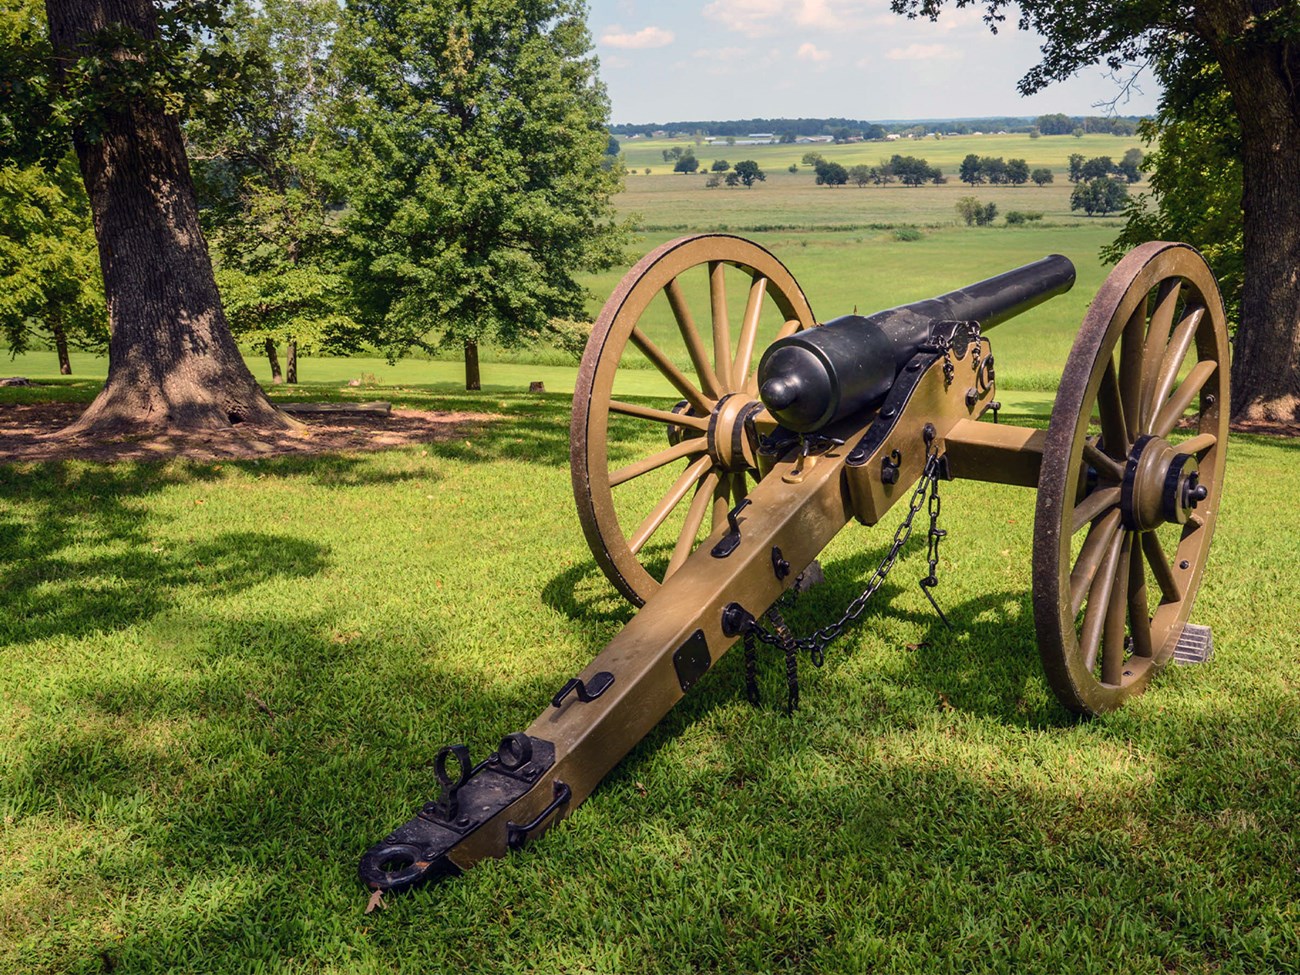 A large cannon sits on a grass covered hill overlooking fields and trees.